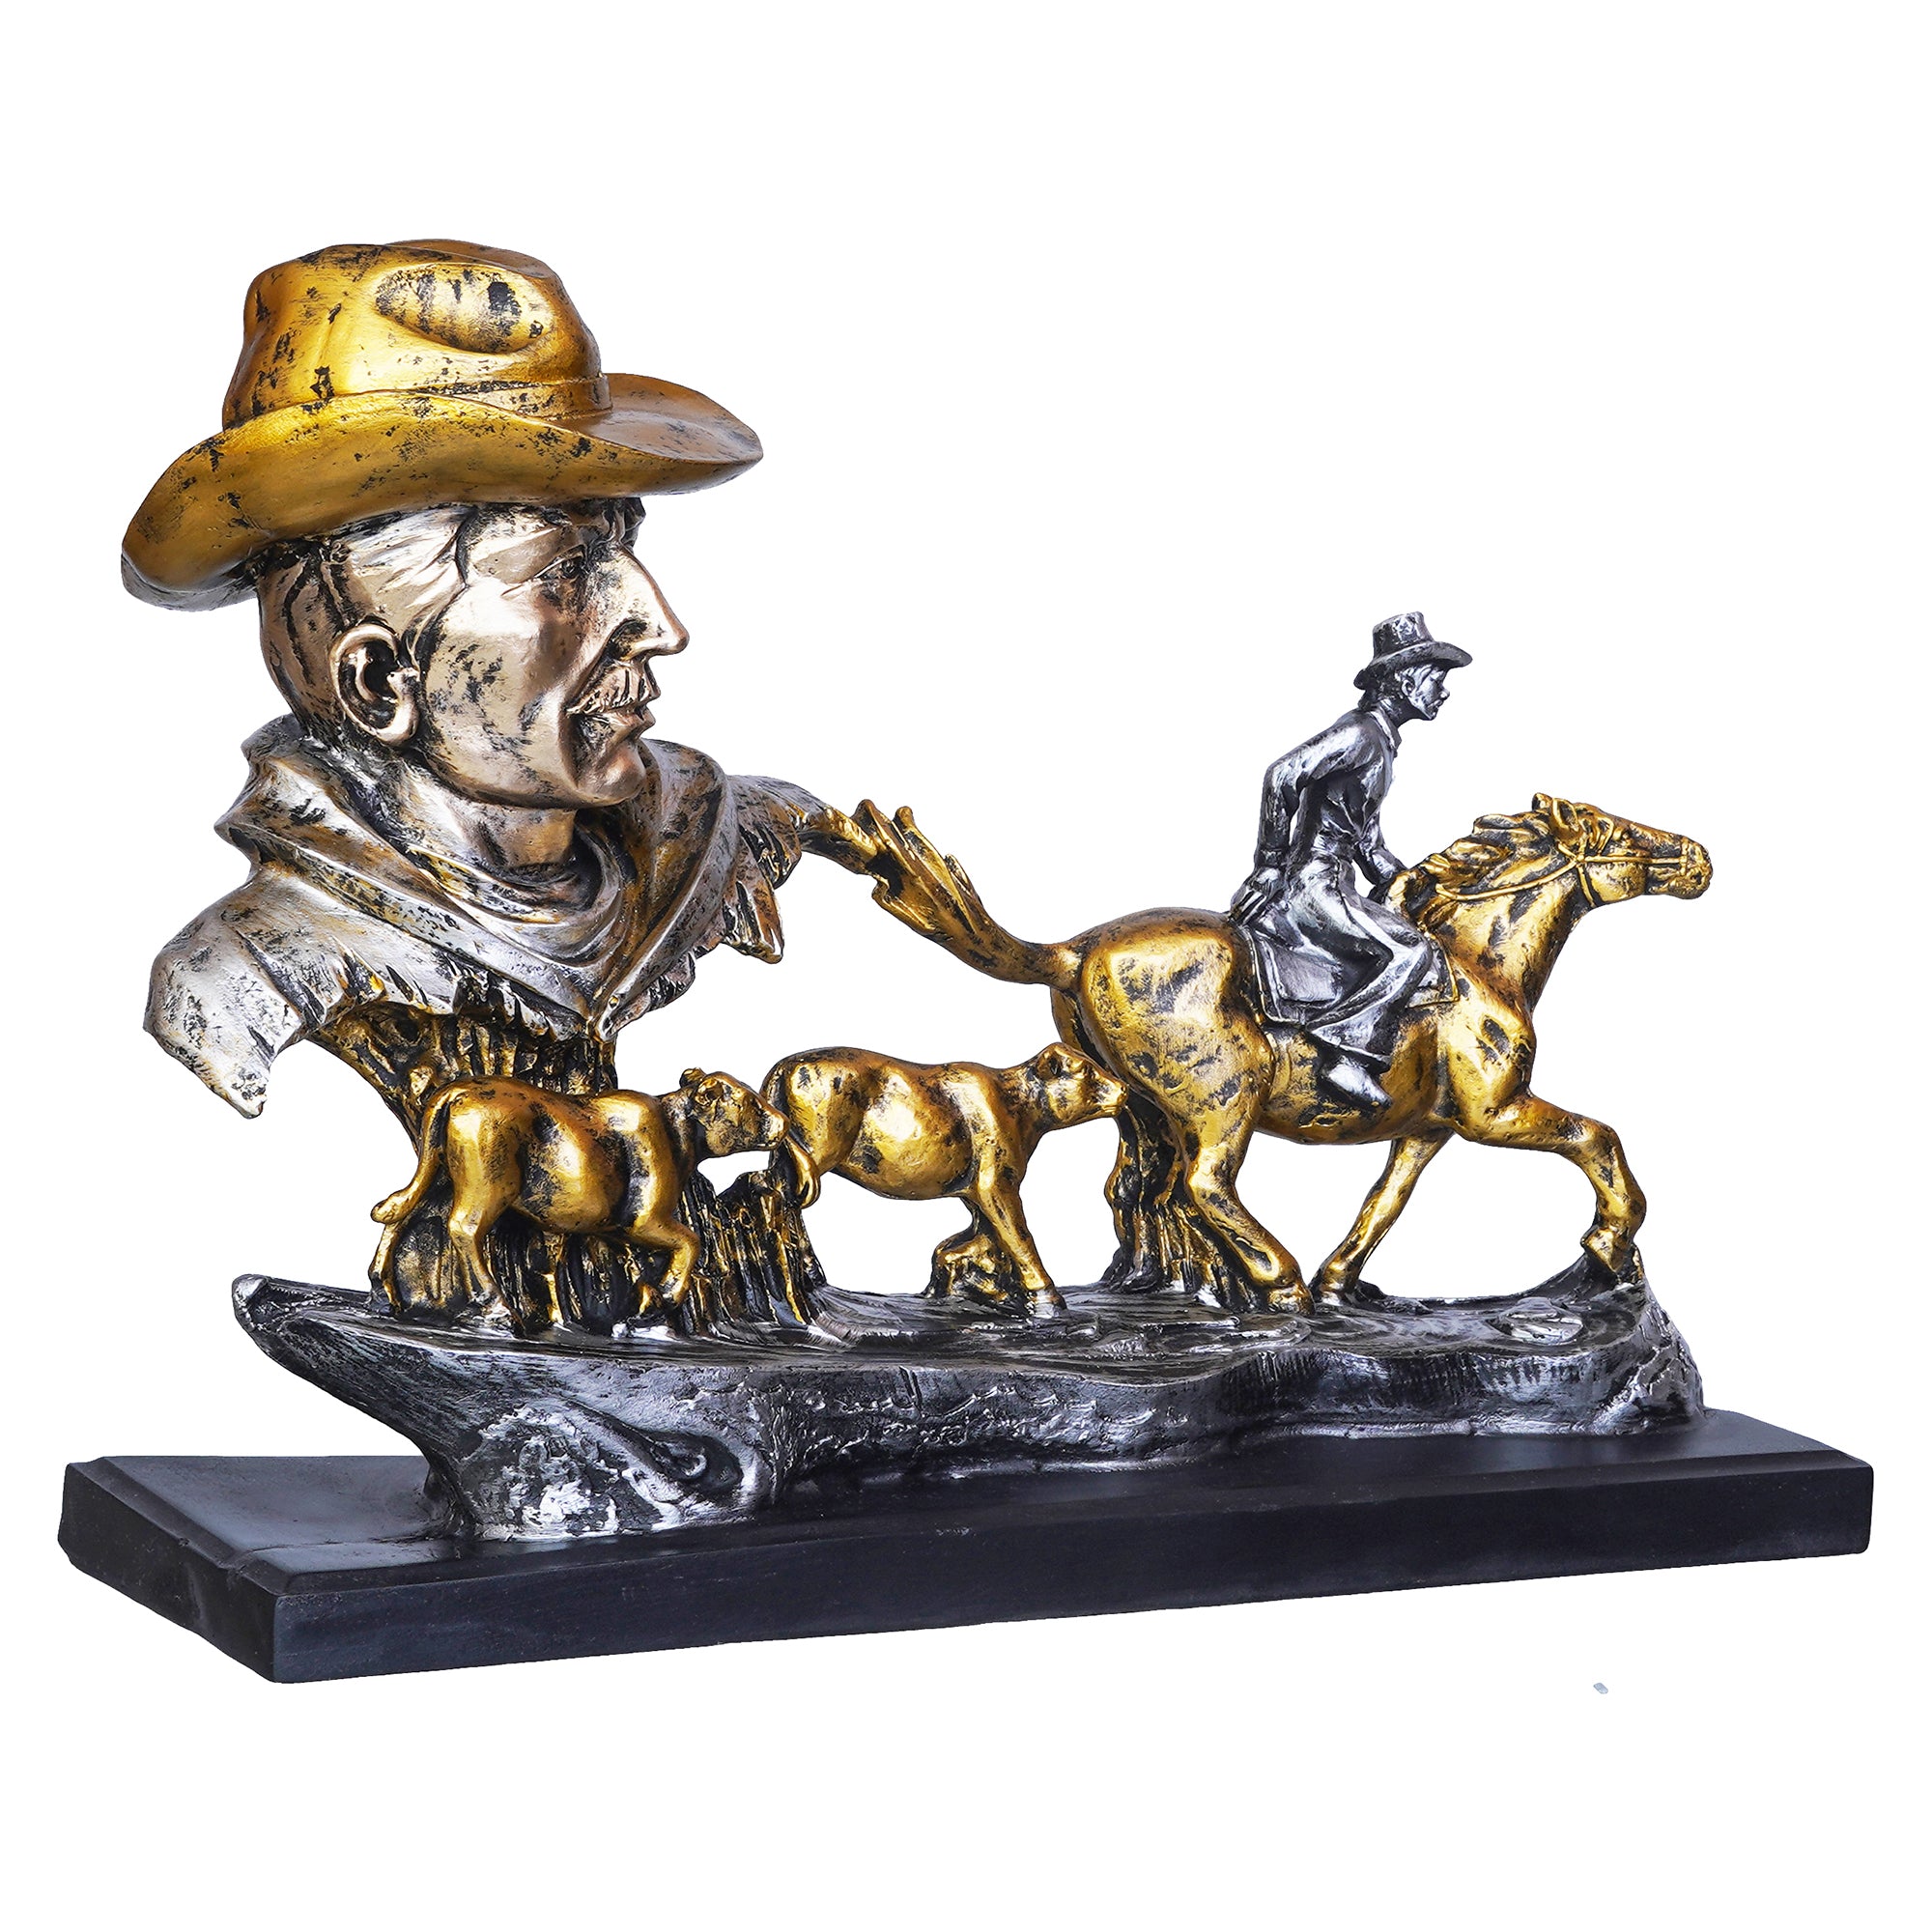 Antique Cowboys Face with Boy Sitting on Running Horse & Cow Statues Decorative Showpiece 7